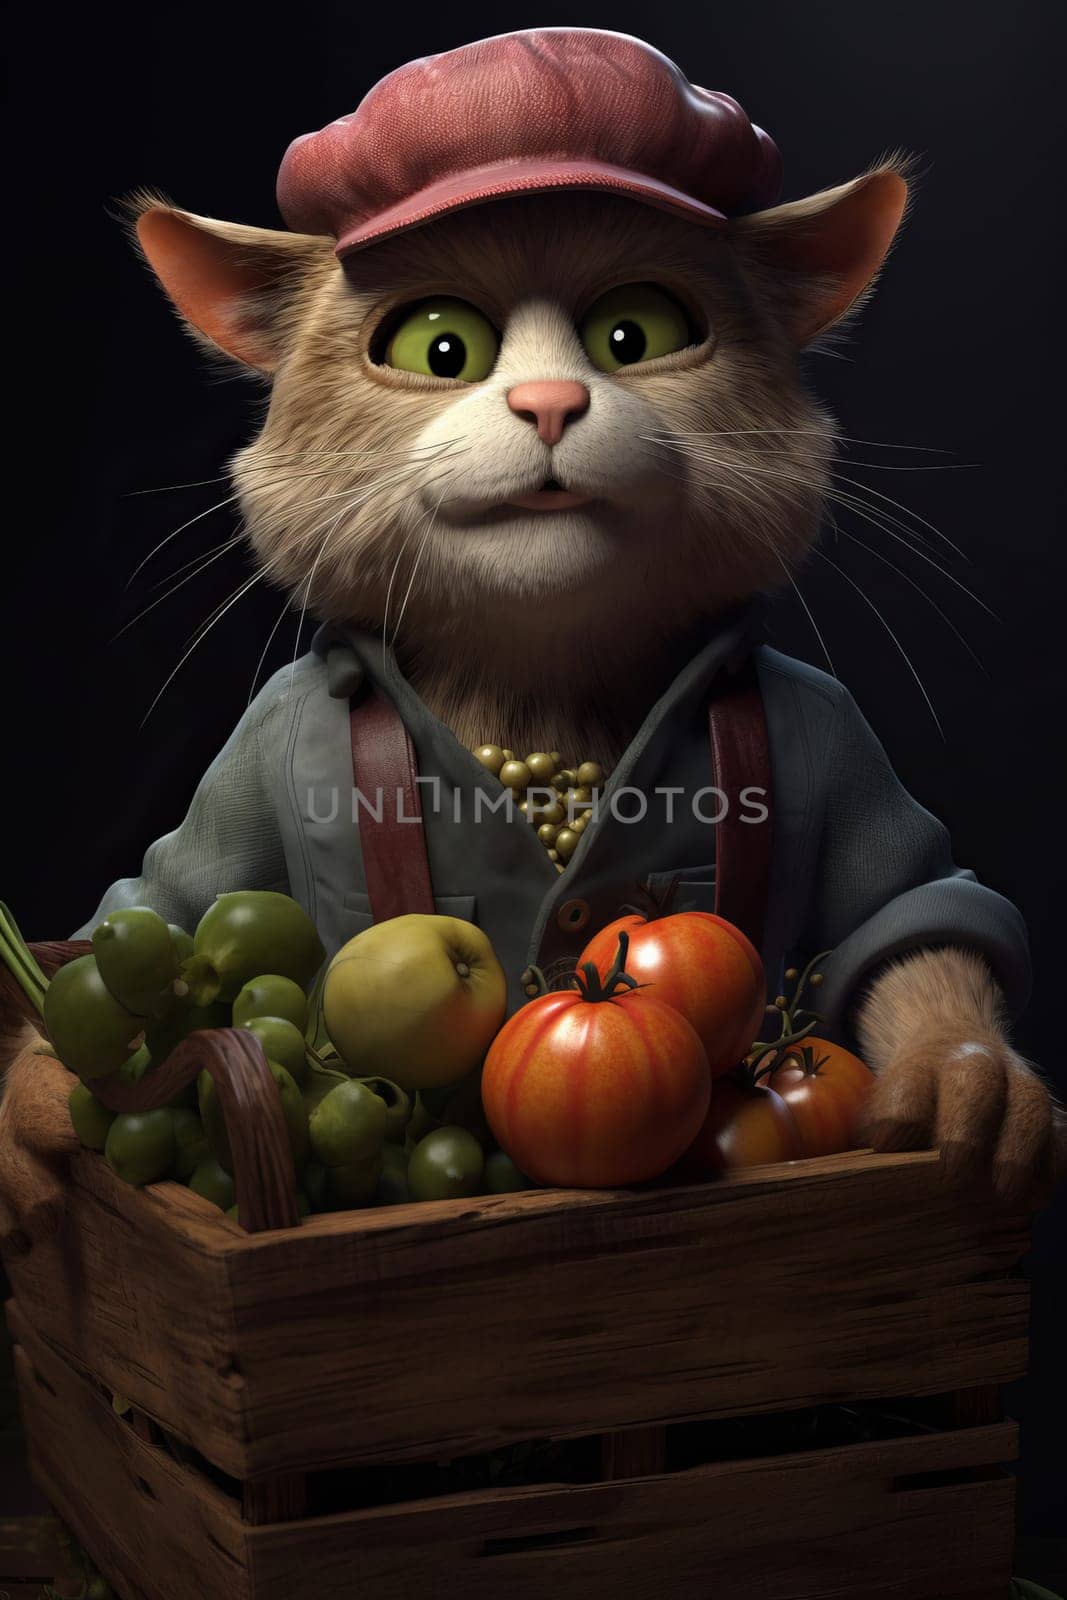 A cute retro farmer cat, holding a wicker basket with tomatoes, stand on dark background